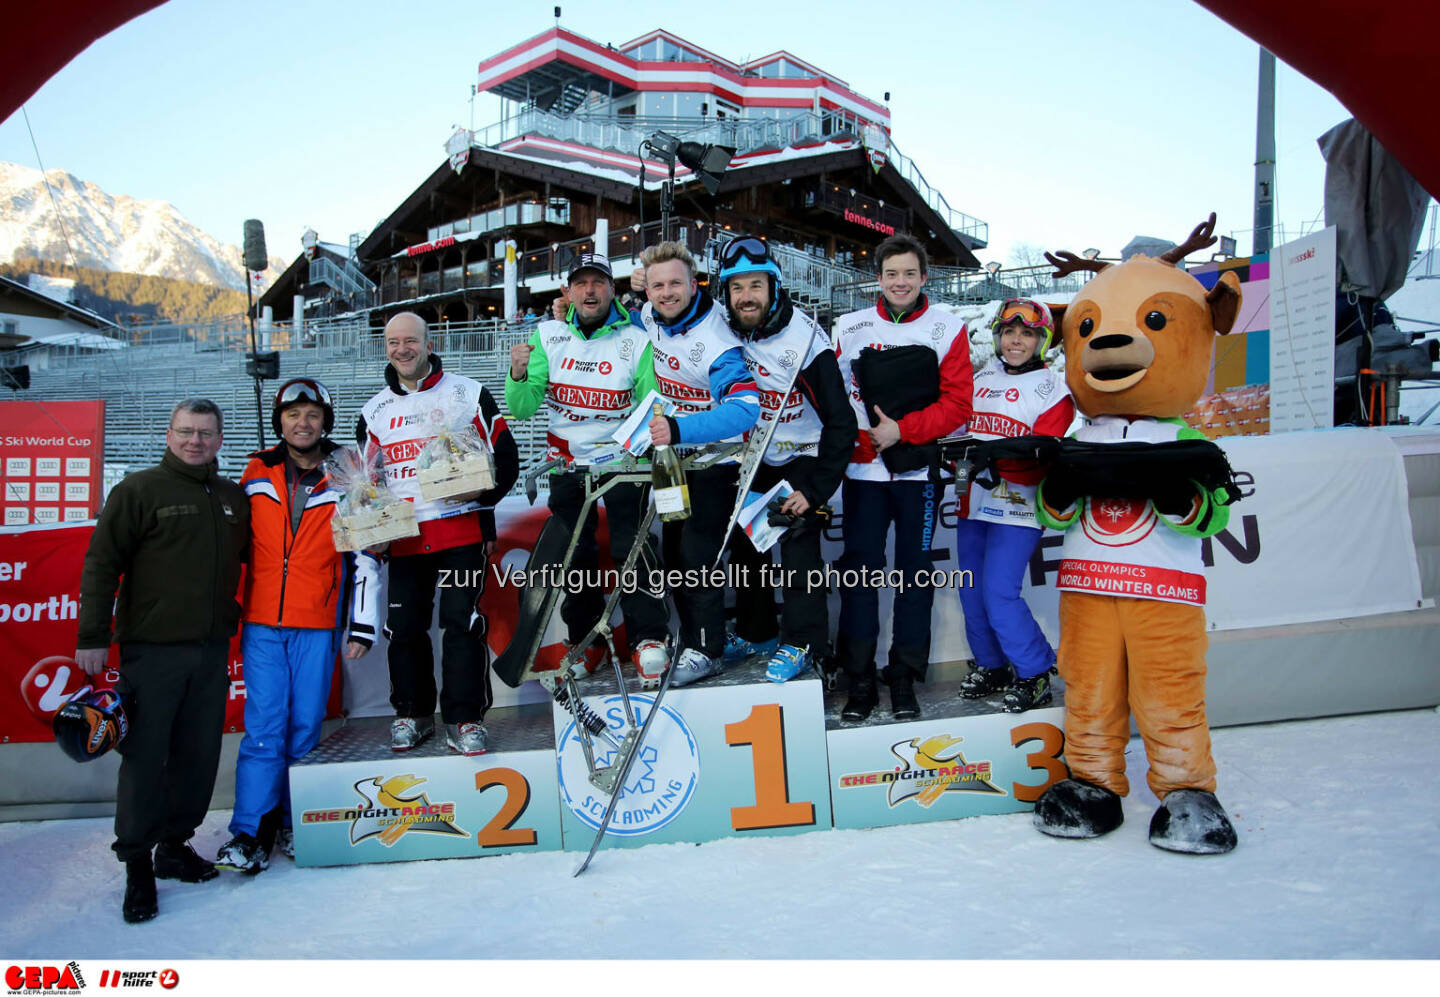 Ski for Gold Charity Race. Image shows managing director Harald Bauer (Sporthilfe), Andy Lee Lang, Gerfried Seeber, Willi Gabalier, Oliver Witvoet, Philipp Hans, Ricarda Huber and maskot Luis. Keywords: Special Olympics World Winter Games, SOWWG Austria 2017 preview. Photo: GEPA pictures/ Daniel Goetzhaber